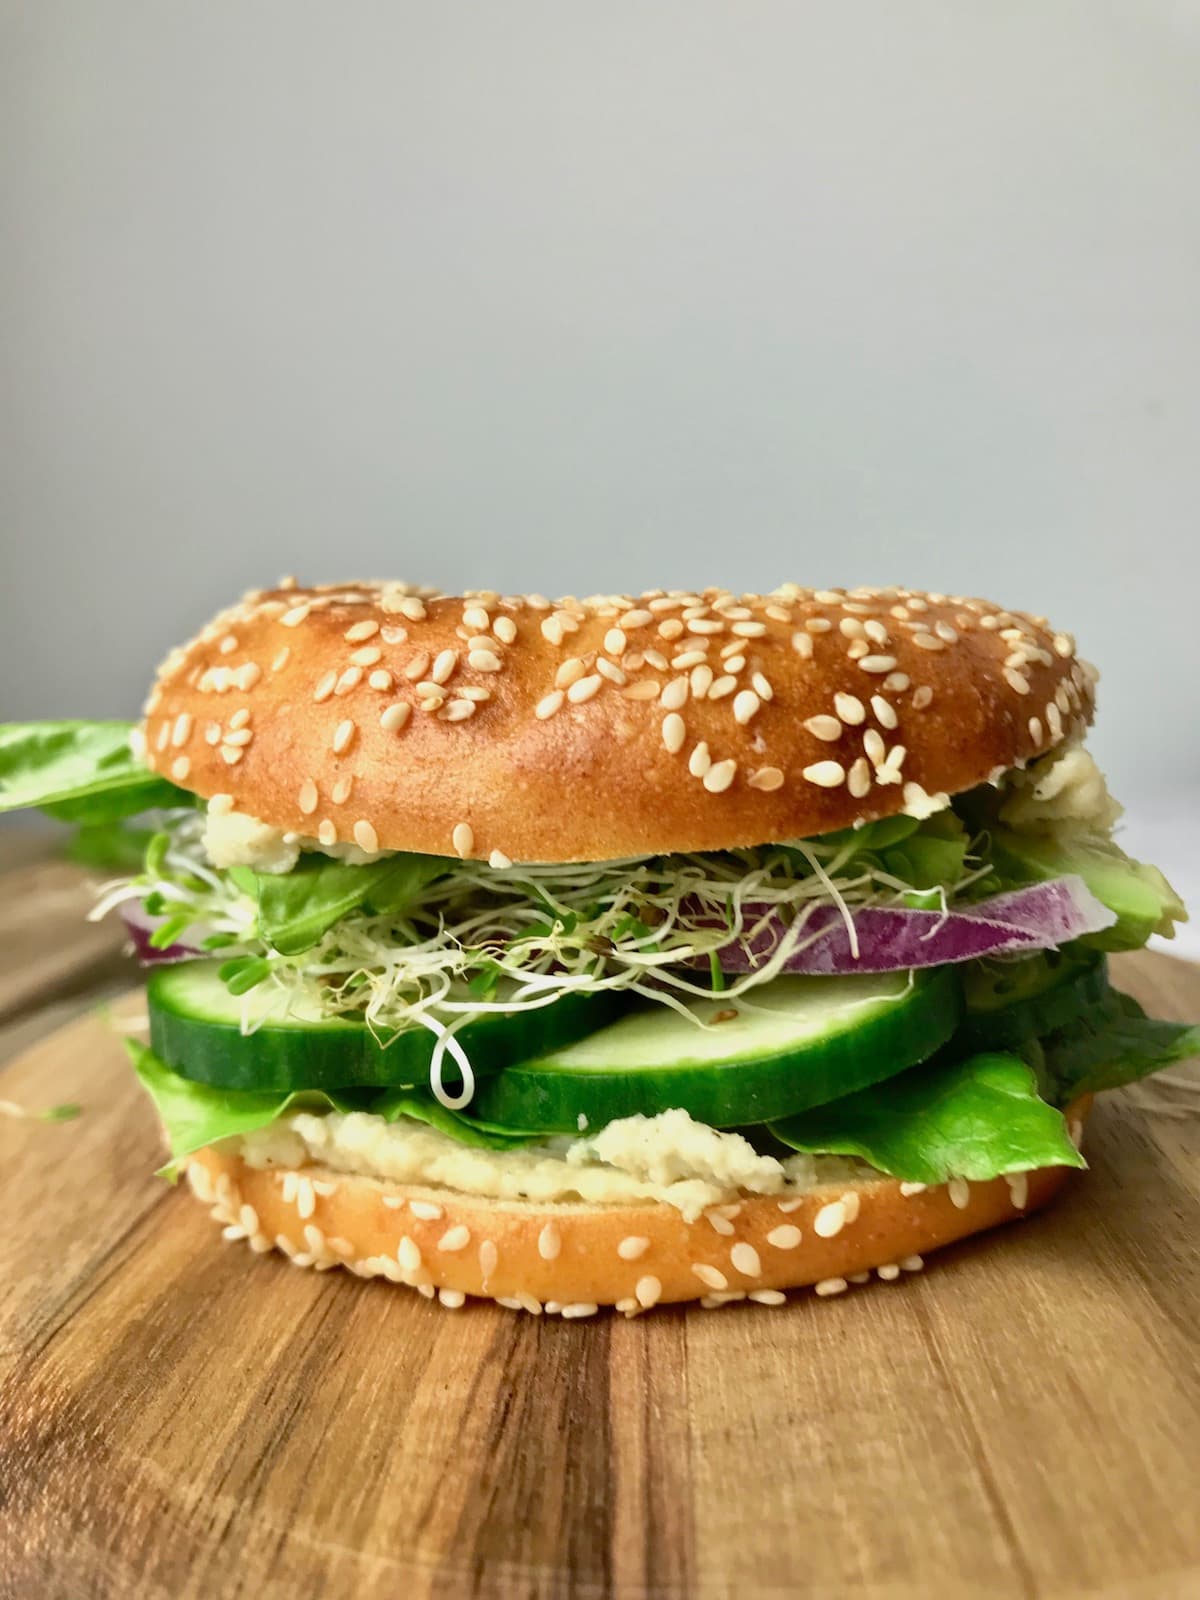 Side view of a bagel filled with vegan cream cheese, cucumber, onion, sprouts, and lettuce.